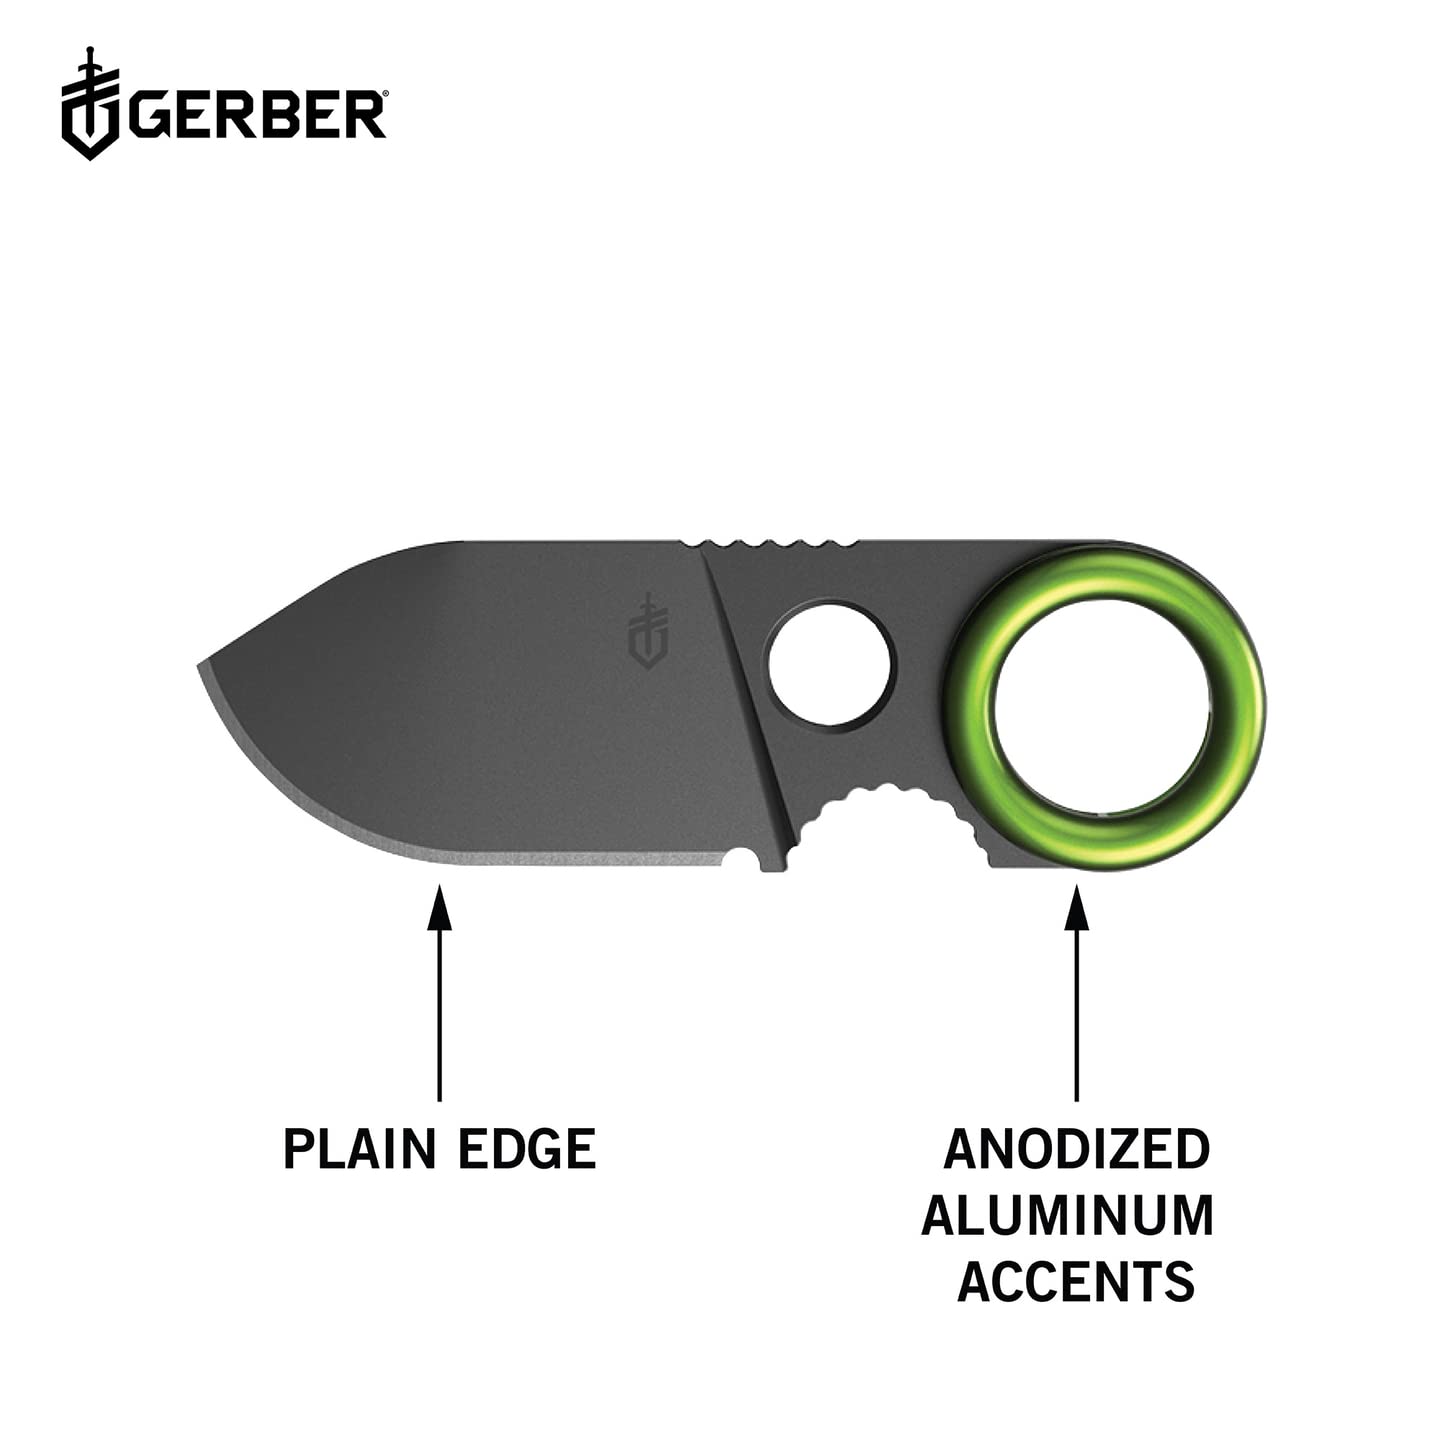 Gerber Gear 31-002521N GDC Pocket Knife Money Clip, GDC Fixed Blade Knife and Case, EDC Gear, Stainless Steel,Grey